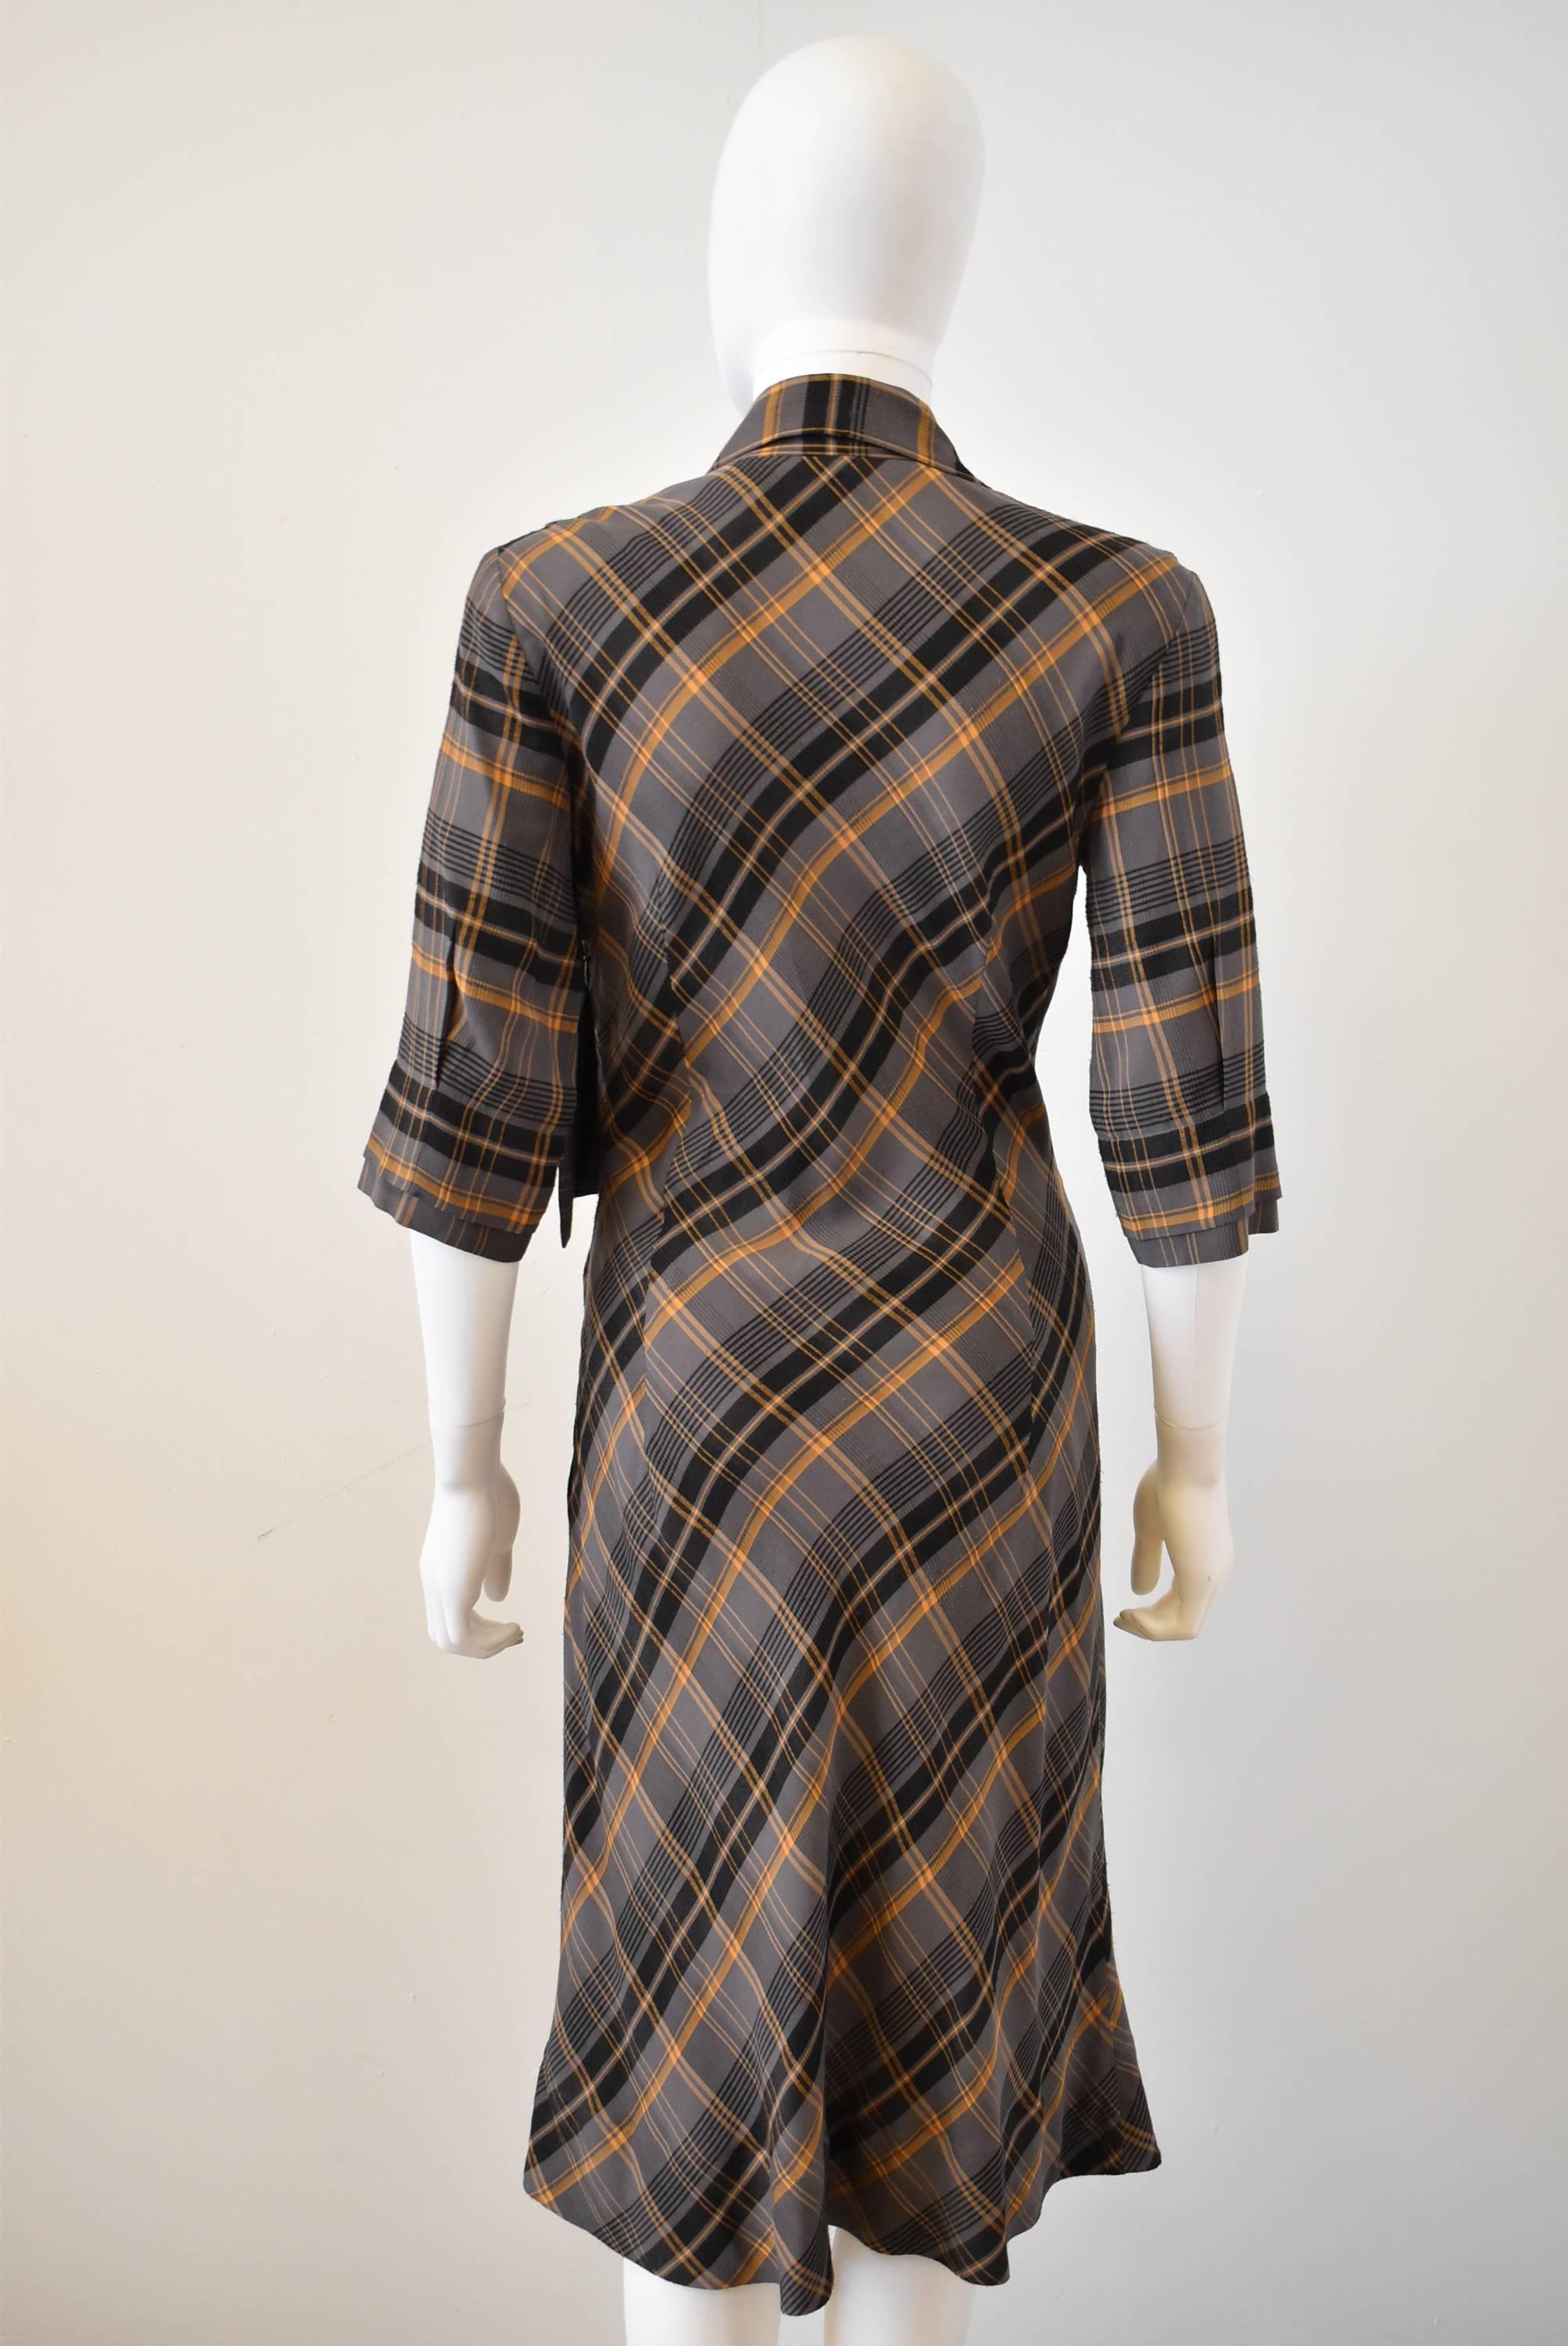 Vivienne Westwood Red Label Grey Tartan Check Dress with Cowl Neck Bib Front In Excellent Condition For Sale In London, GB